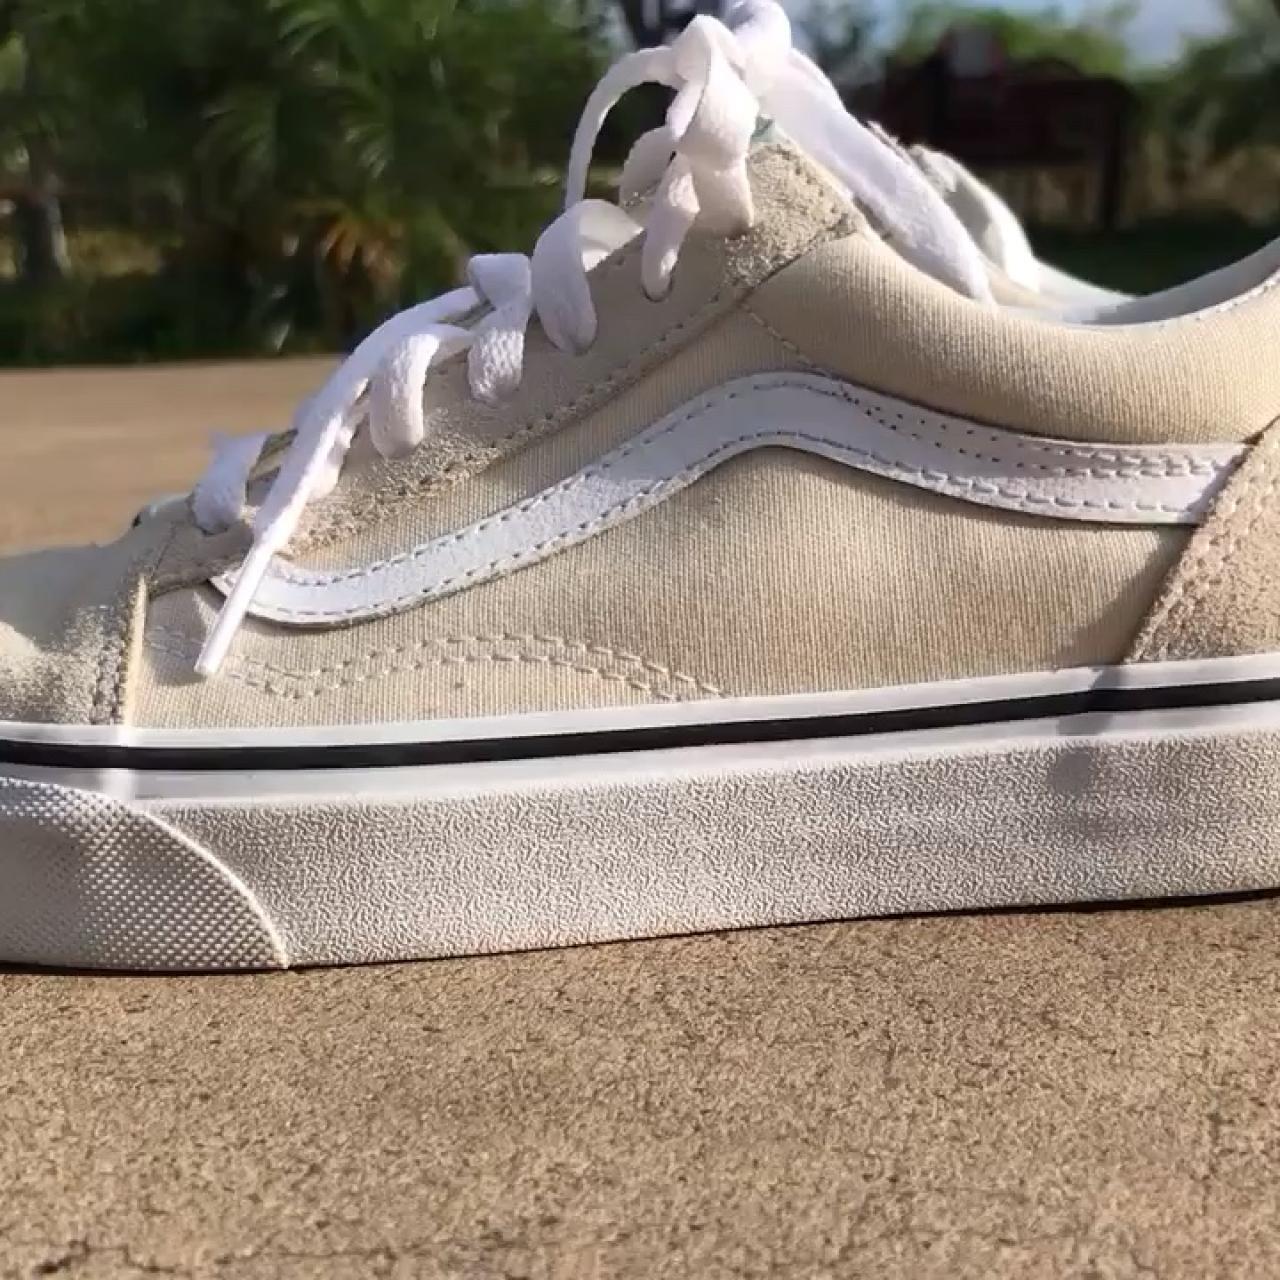 white vans. They are a neutral color 